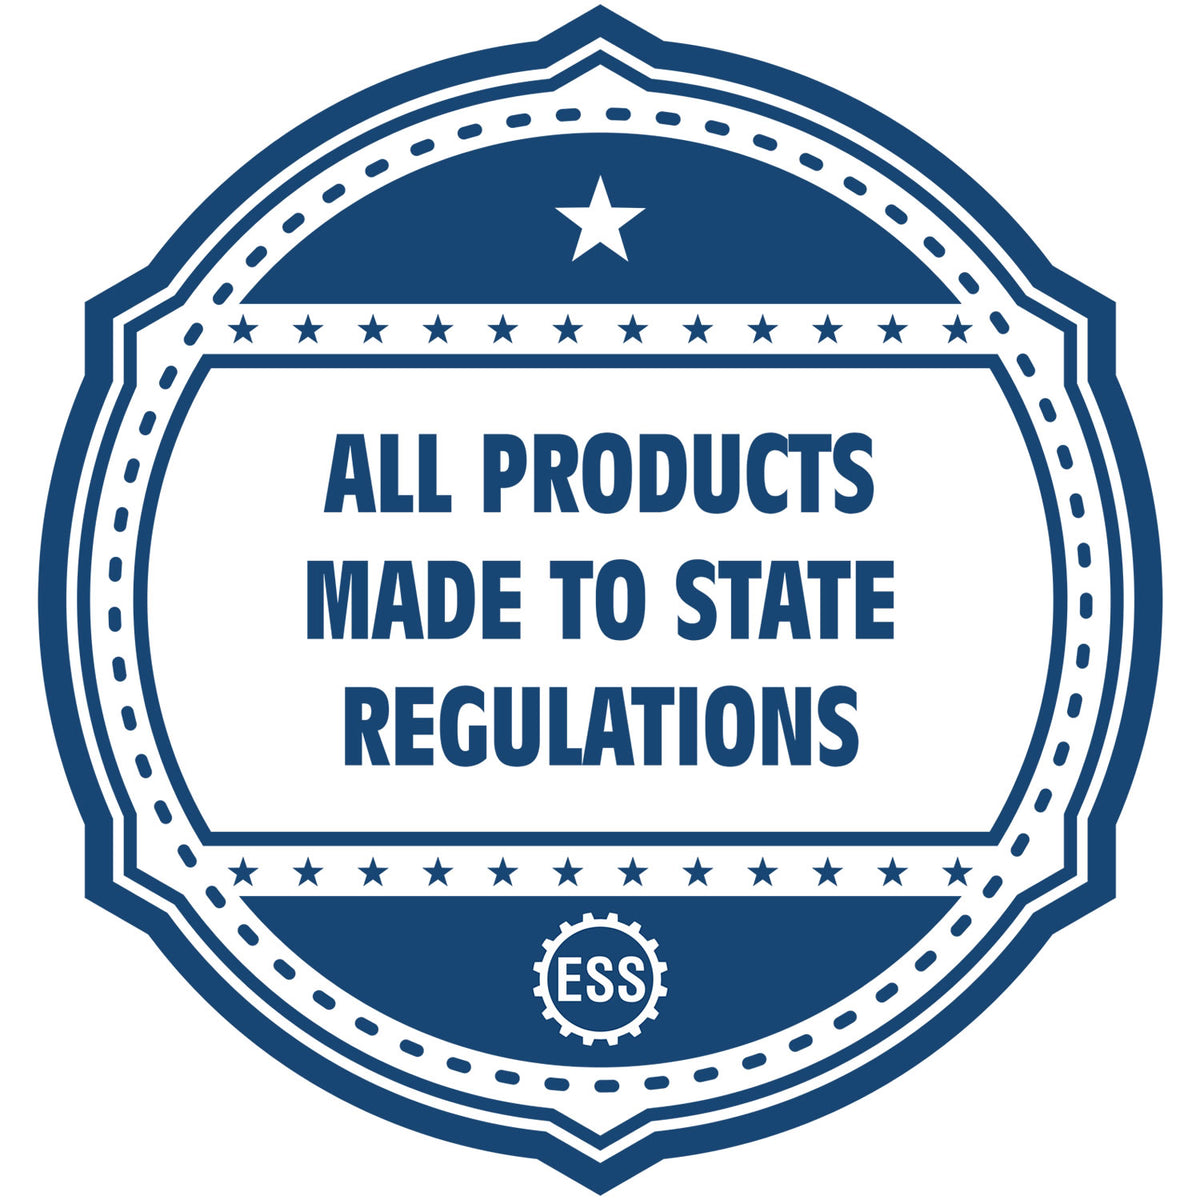 An icon or badge element for the Long Reach Alaska PE Seal showing that this product is made in compliance with state regulations.